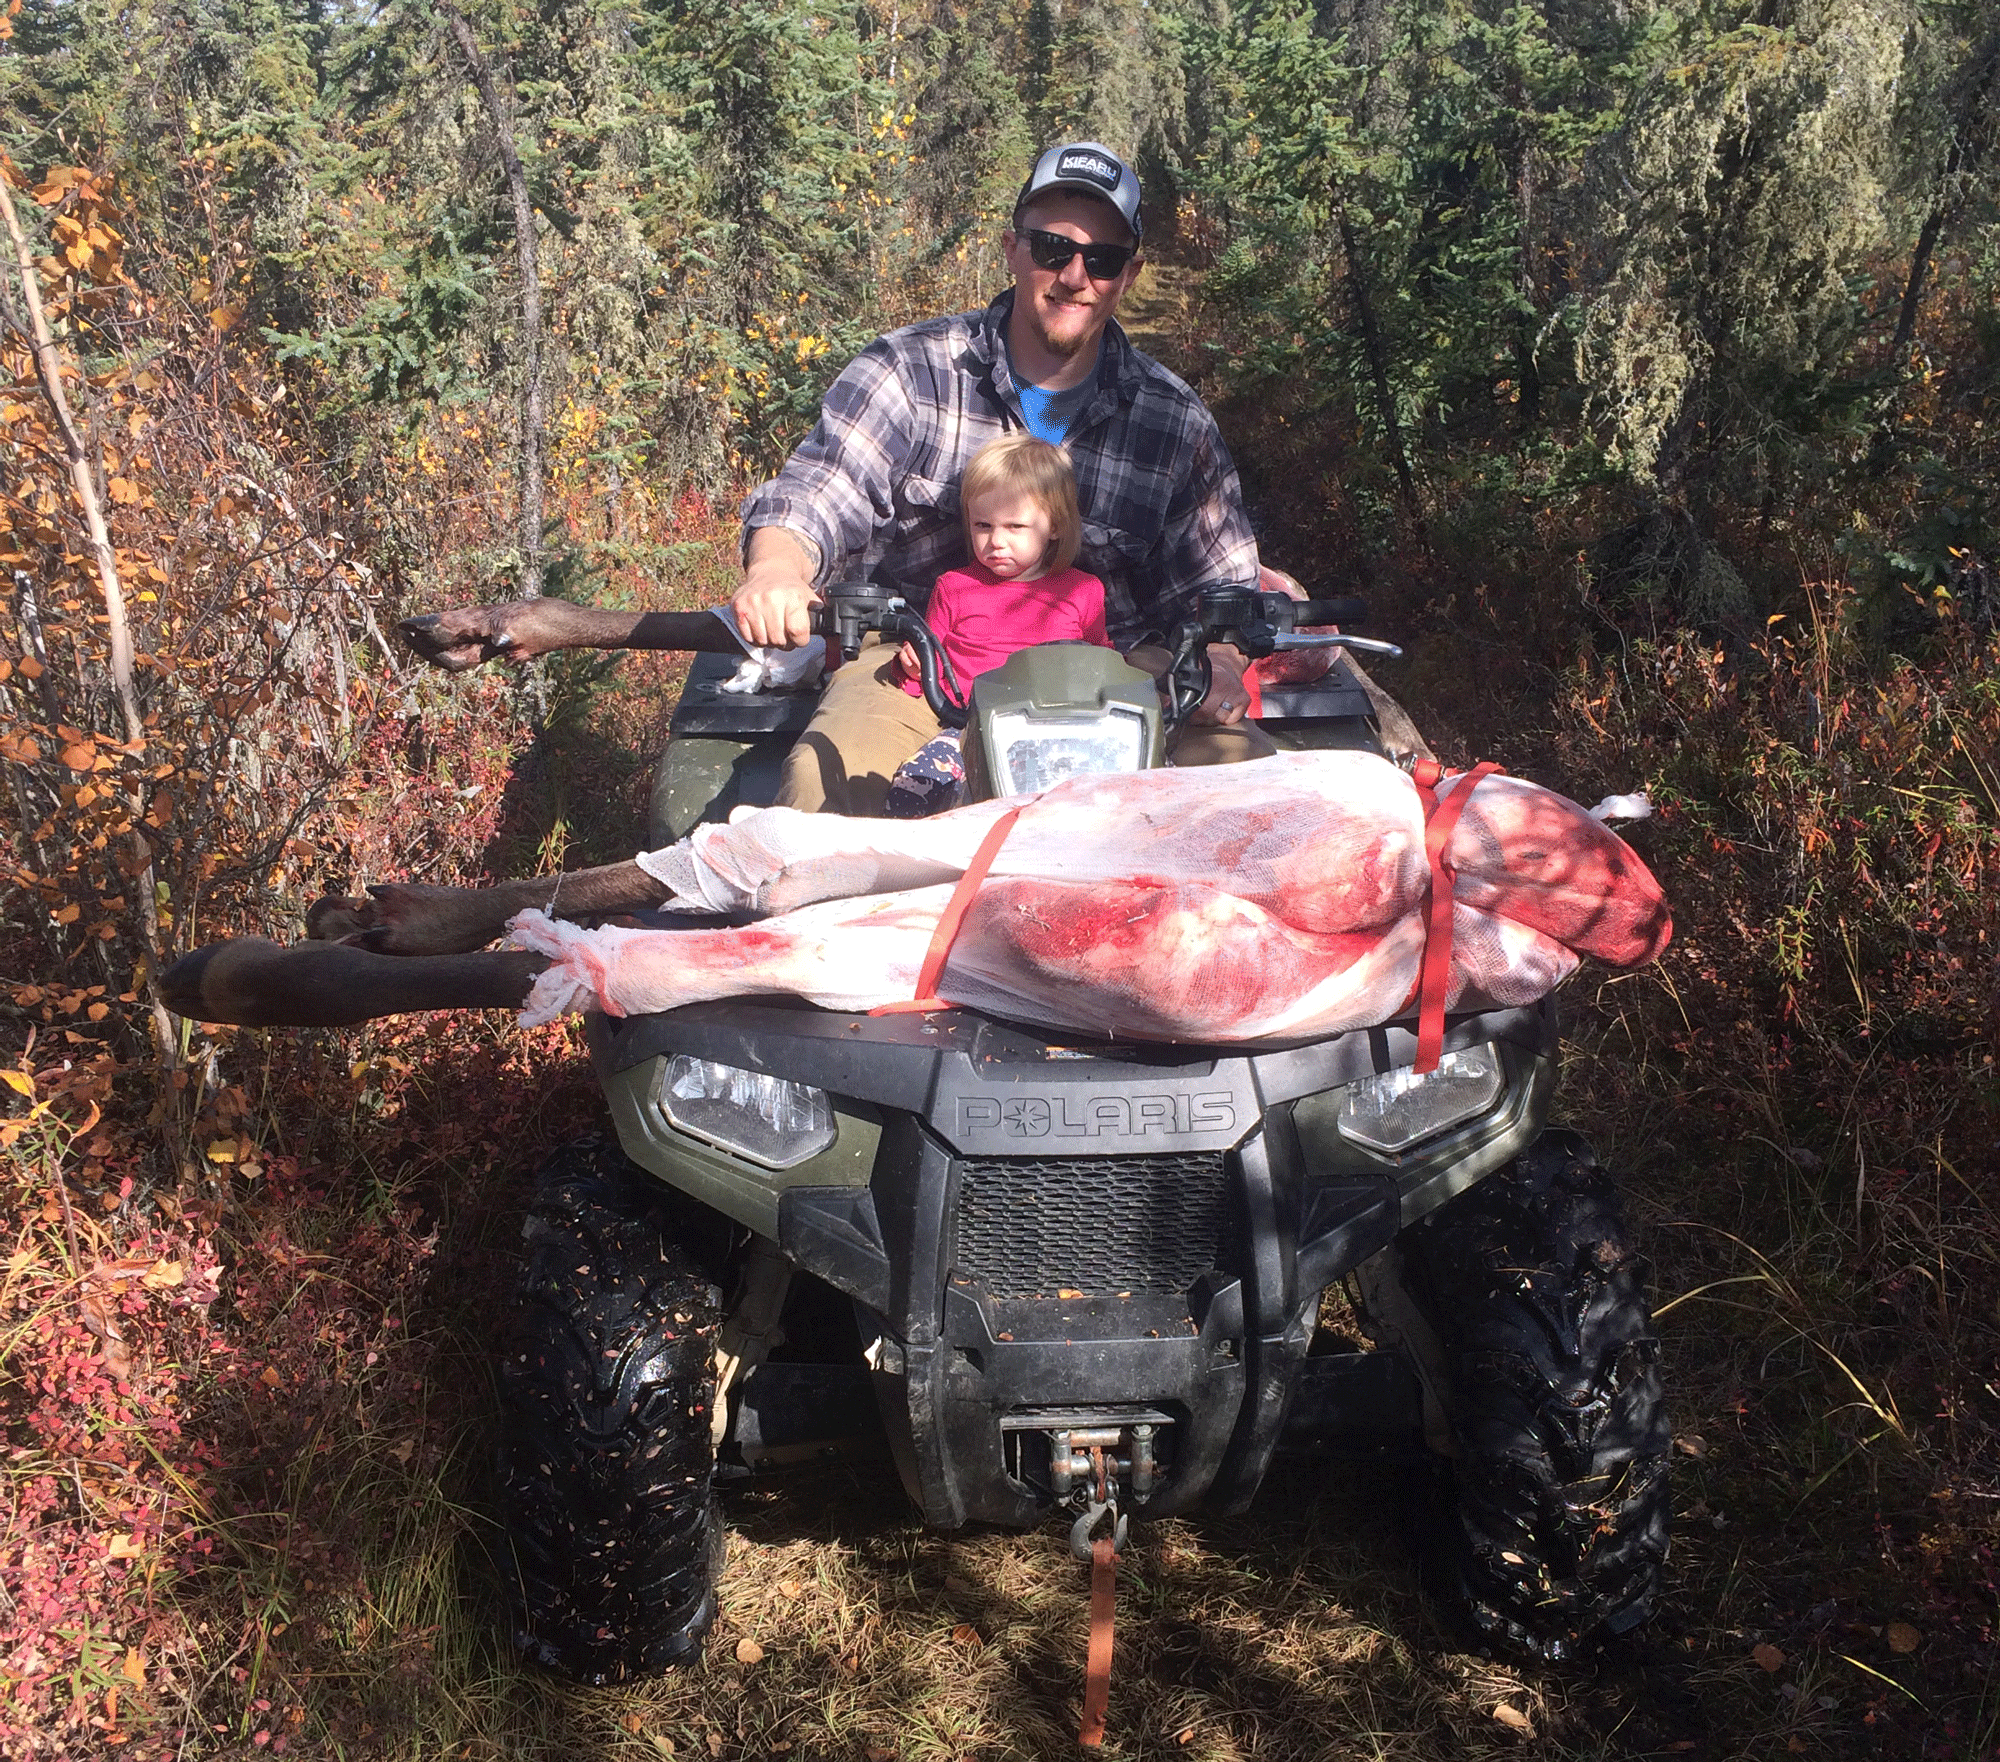 Freel hauls moose meat out with Polaris four wheeler